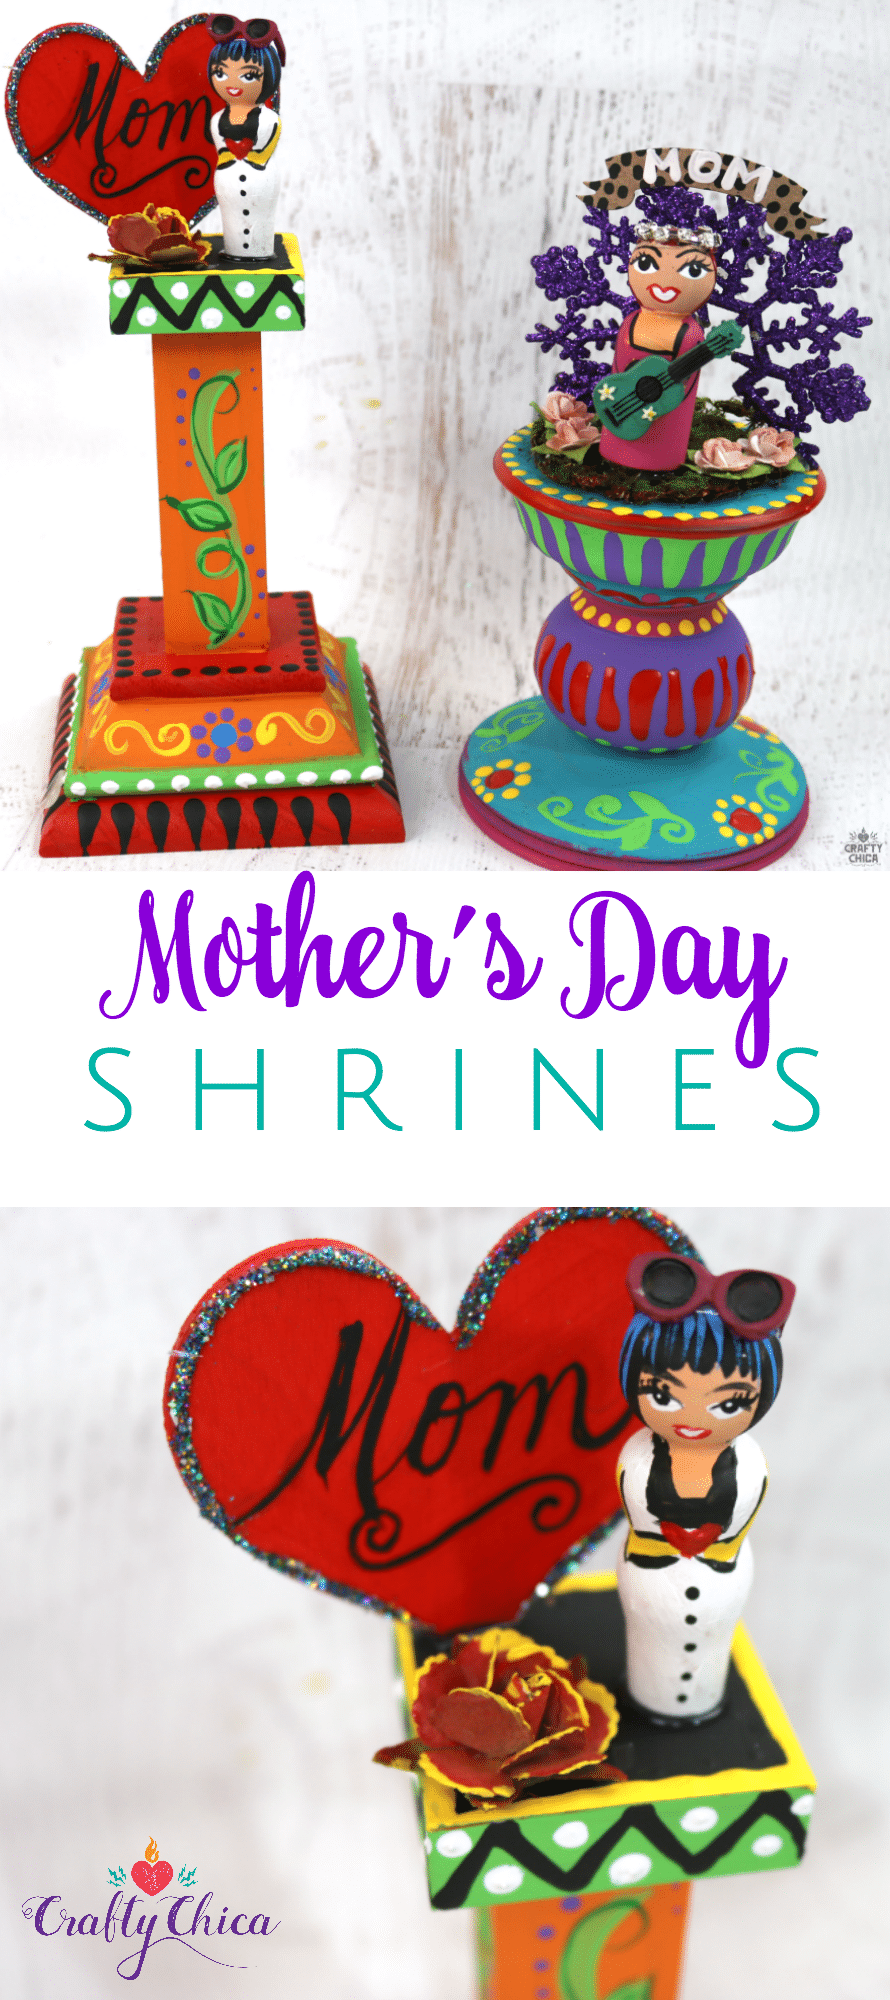 Mother's Day Shrines, by Crafty Chica